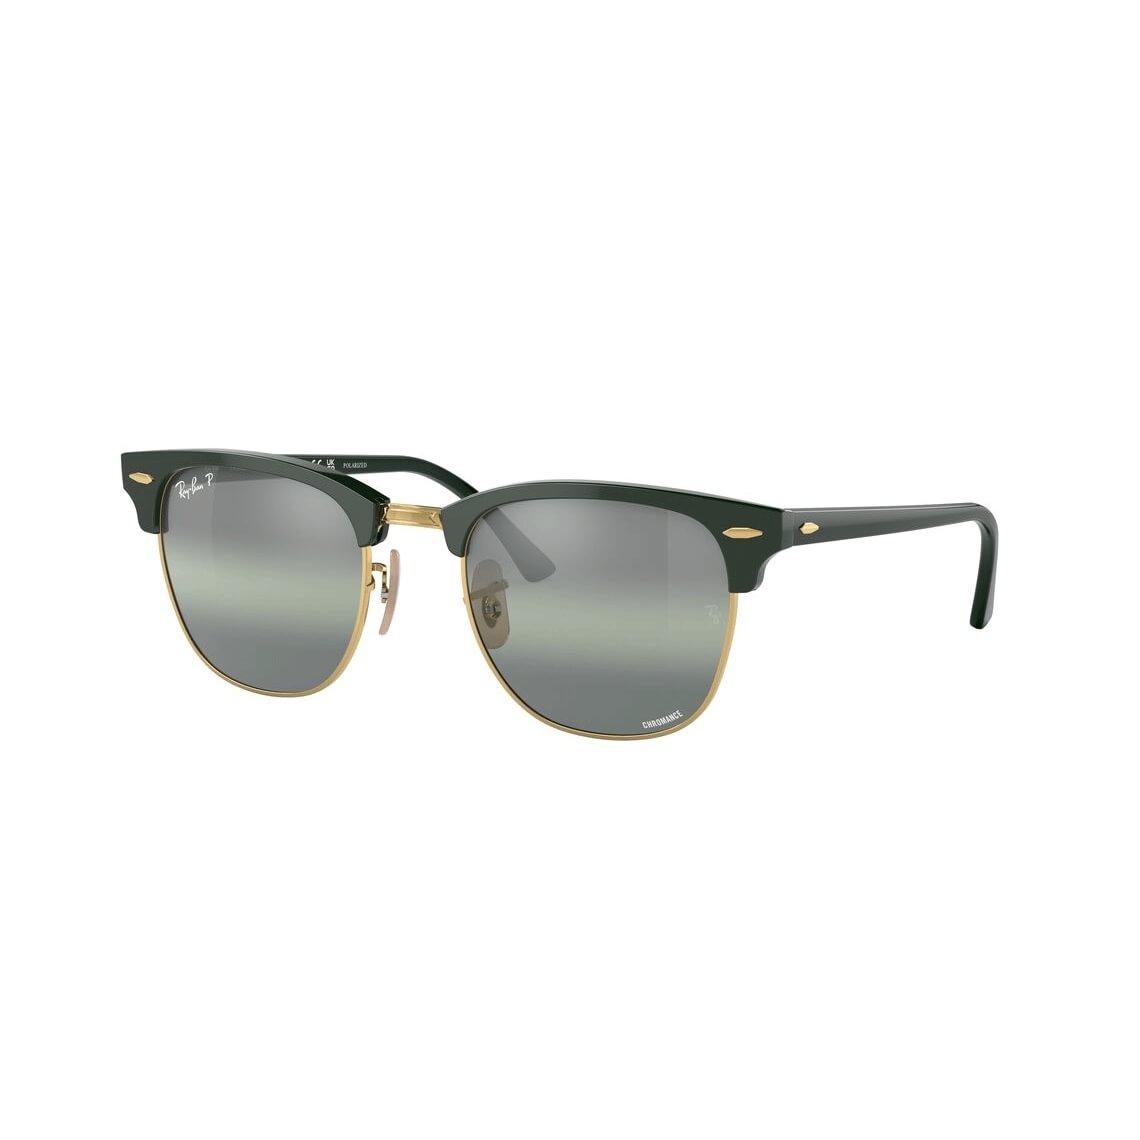 Ray-Ban Clubmaster RB3016 1368G4 5121